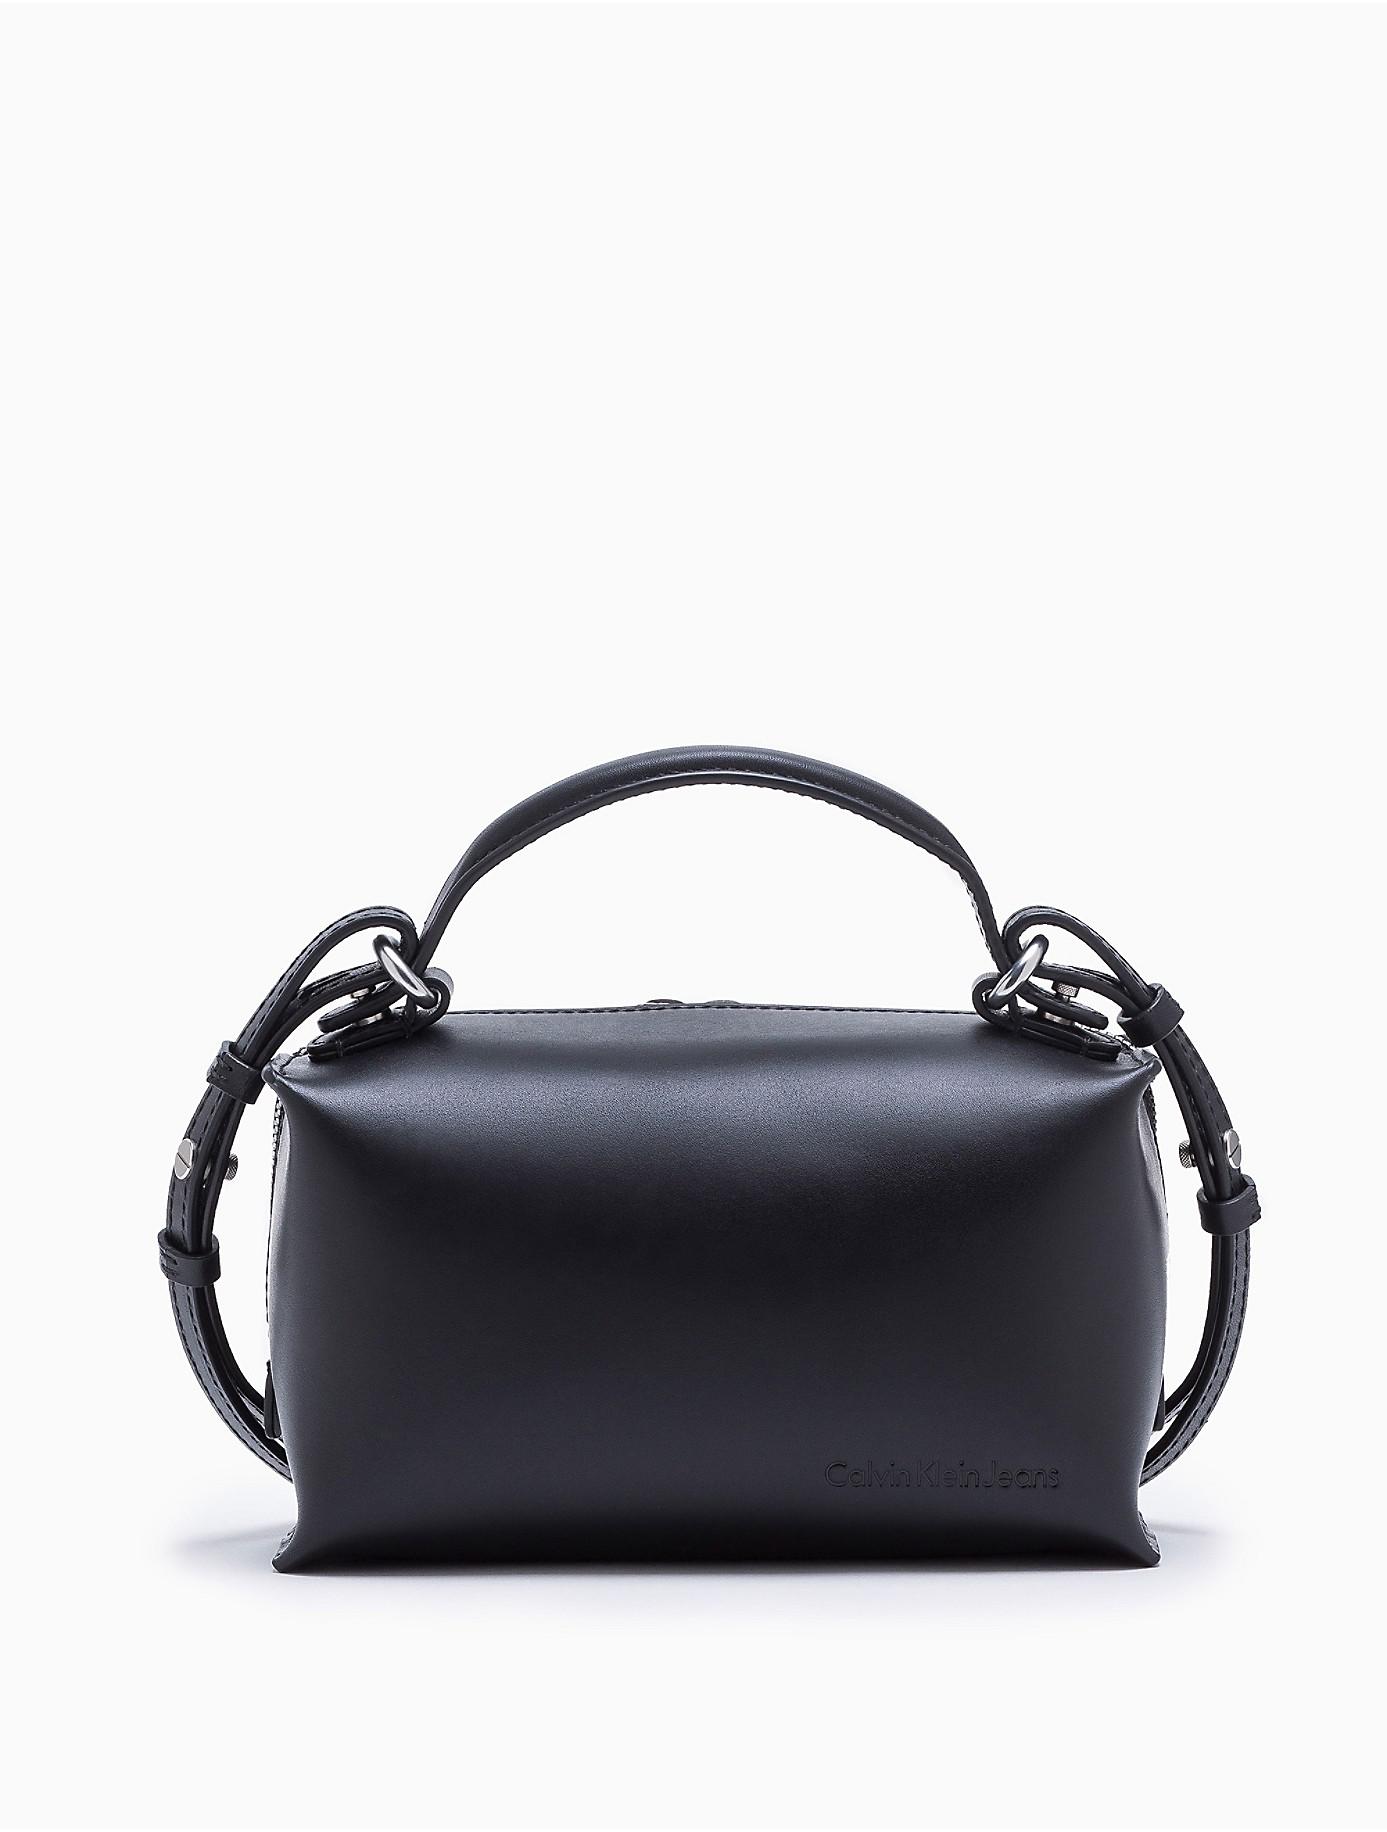 CALVIN KLEIN 205W39NYC Leather City Box Bag in Black - Lyst